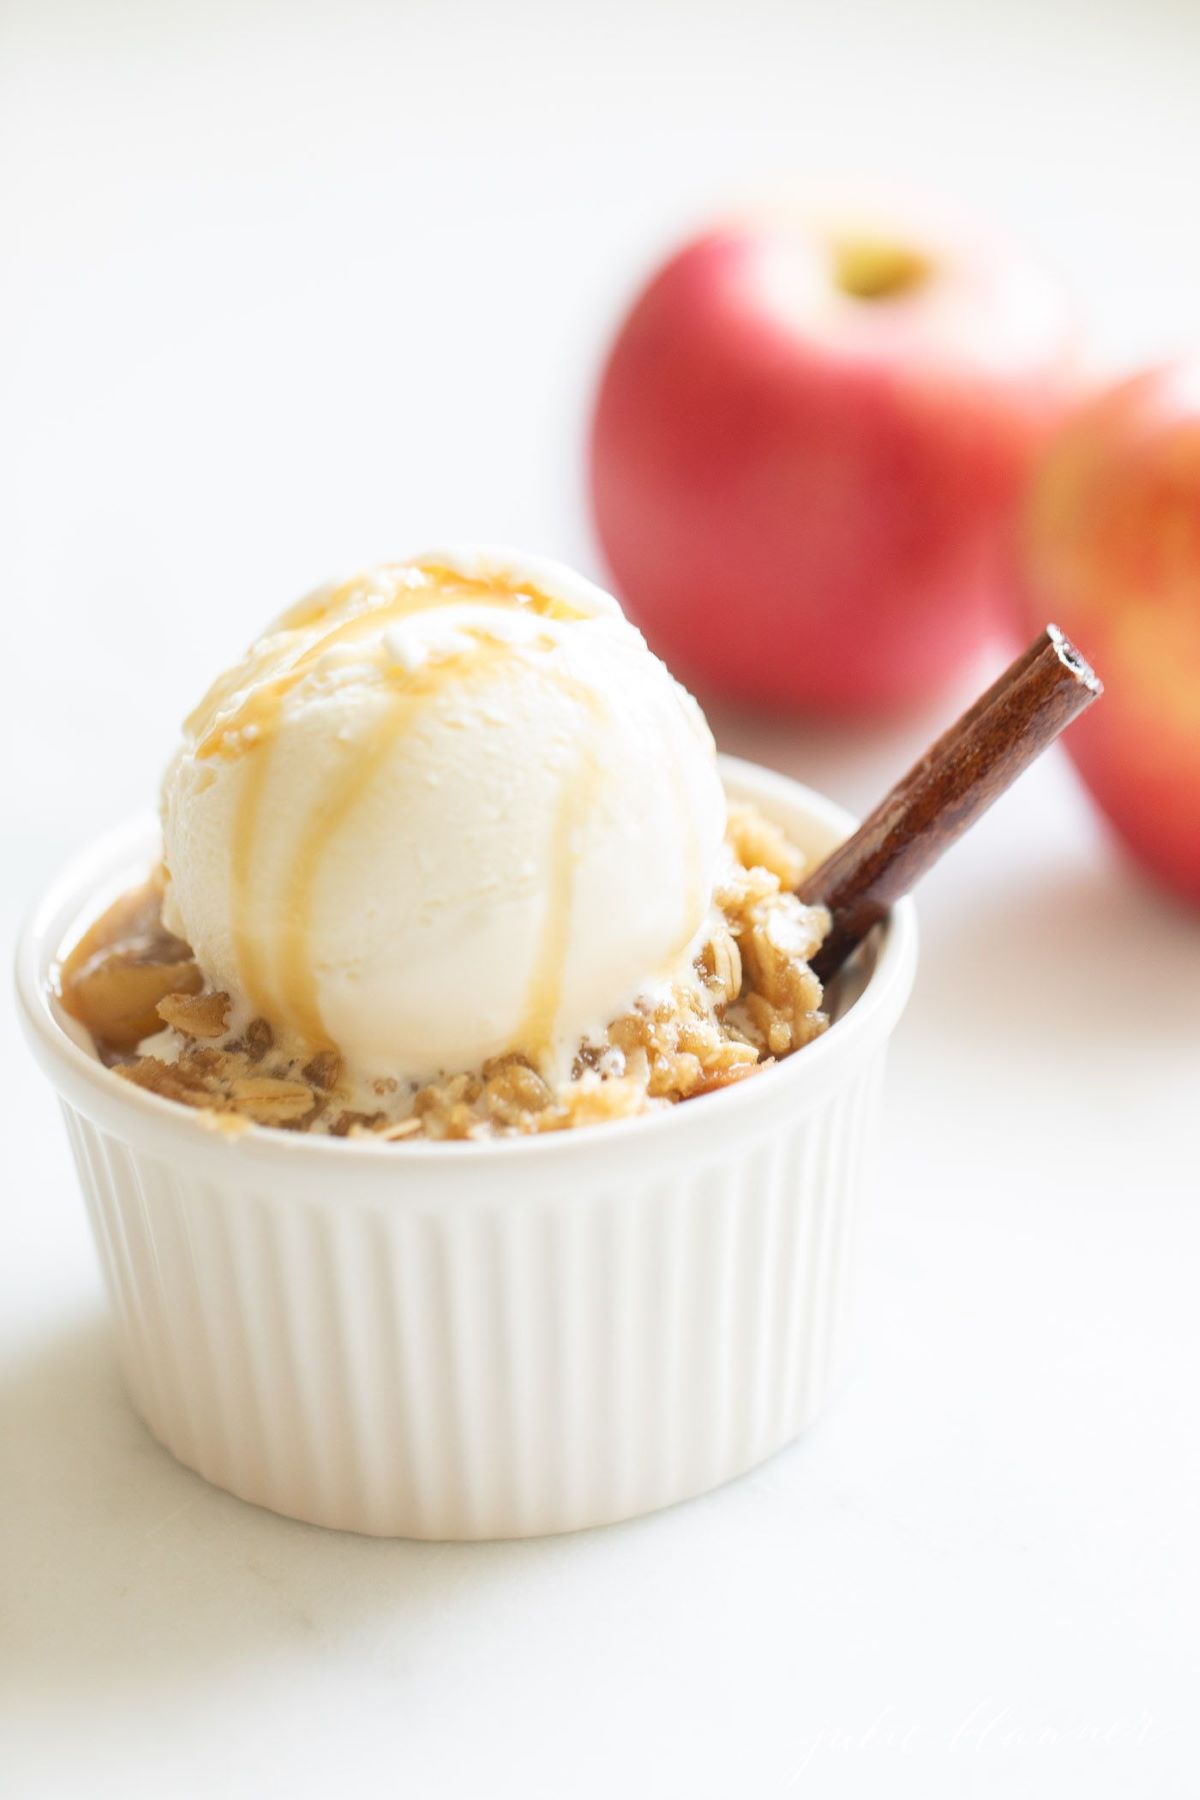 Apple crisp topped with ice cream in a small white ramekin, apples in the background